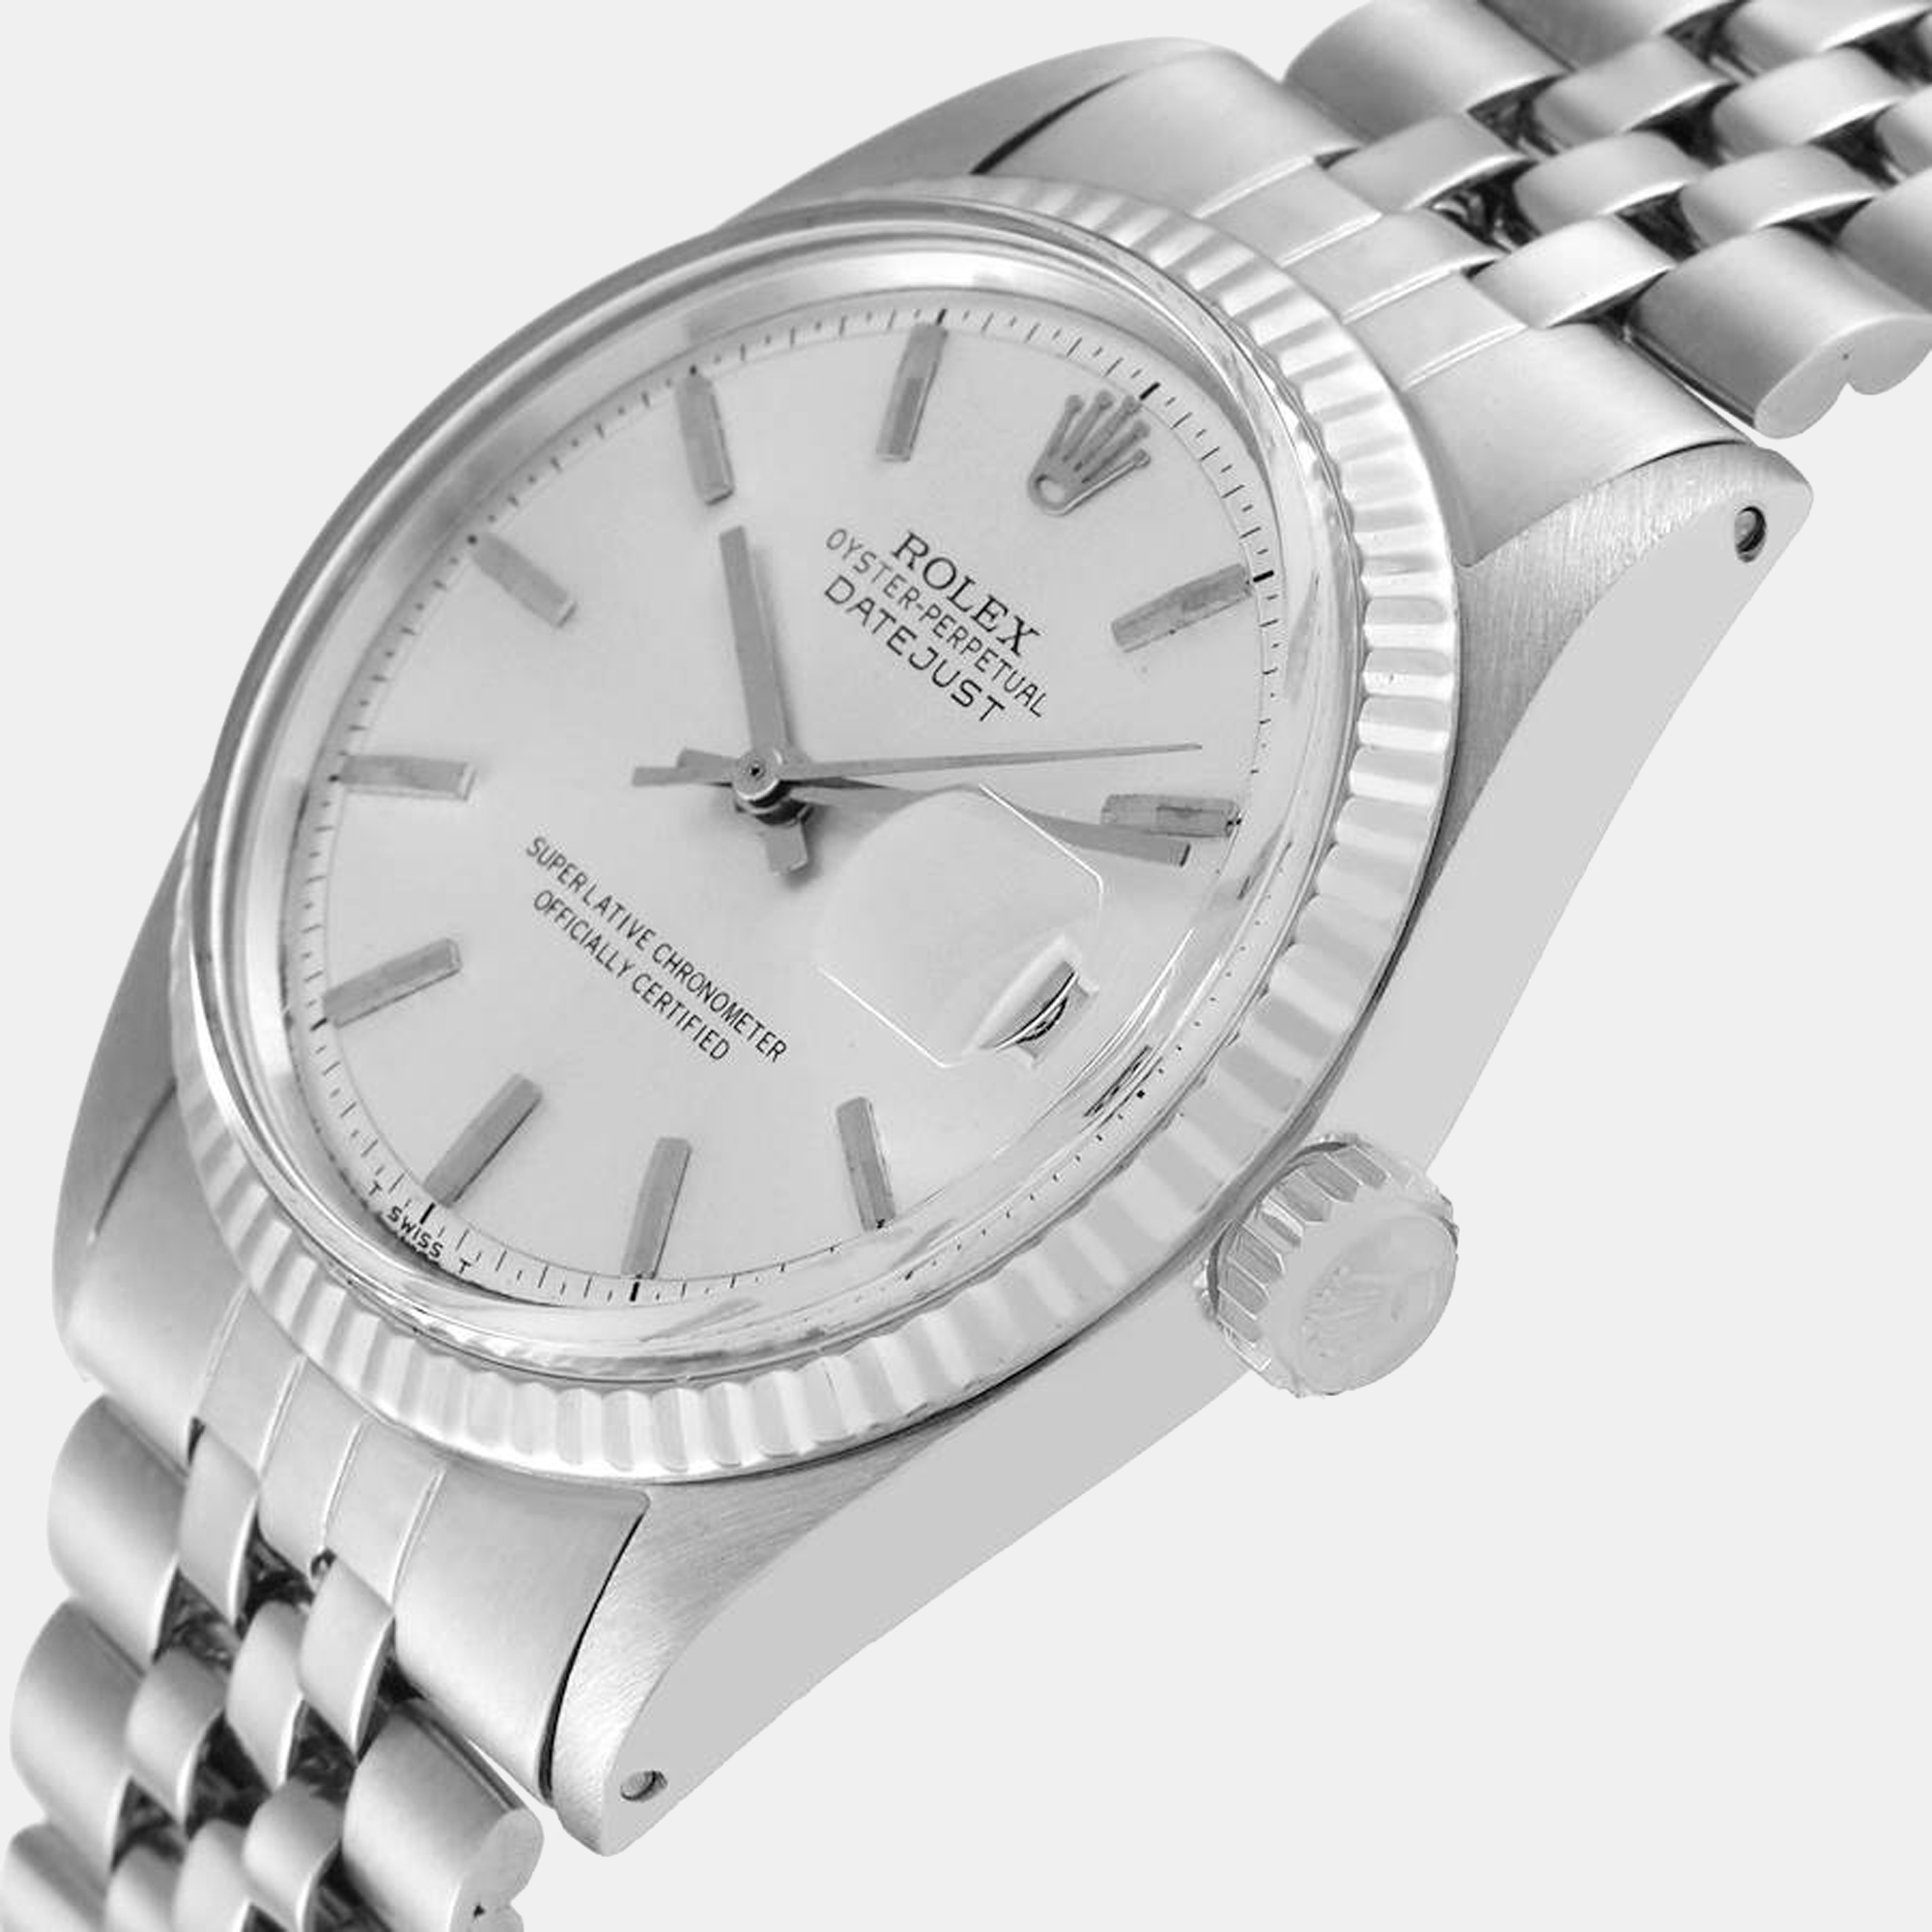 

Rolex Silver 18k White Gold And Stainless Steel Datejust 1601 Men's Wristwatch 36 mm